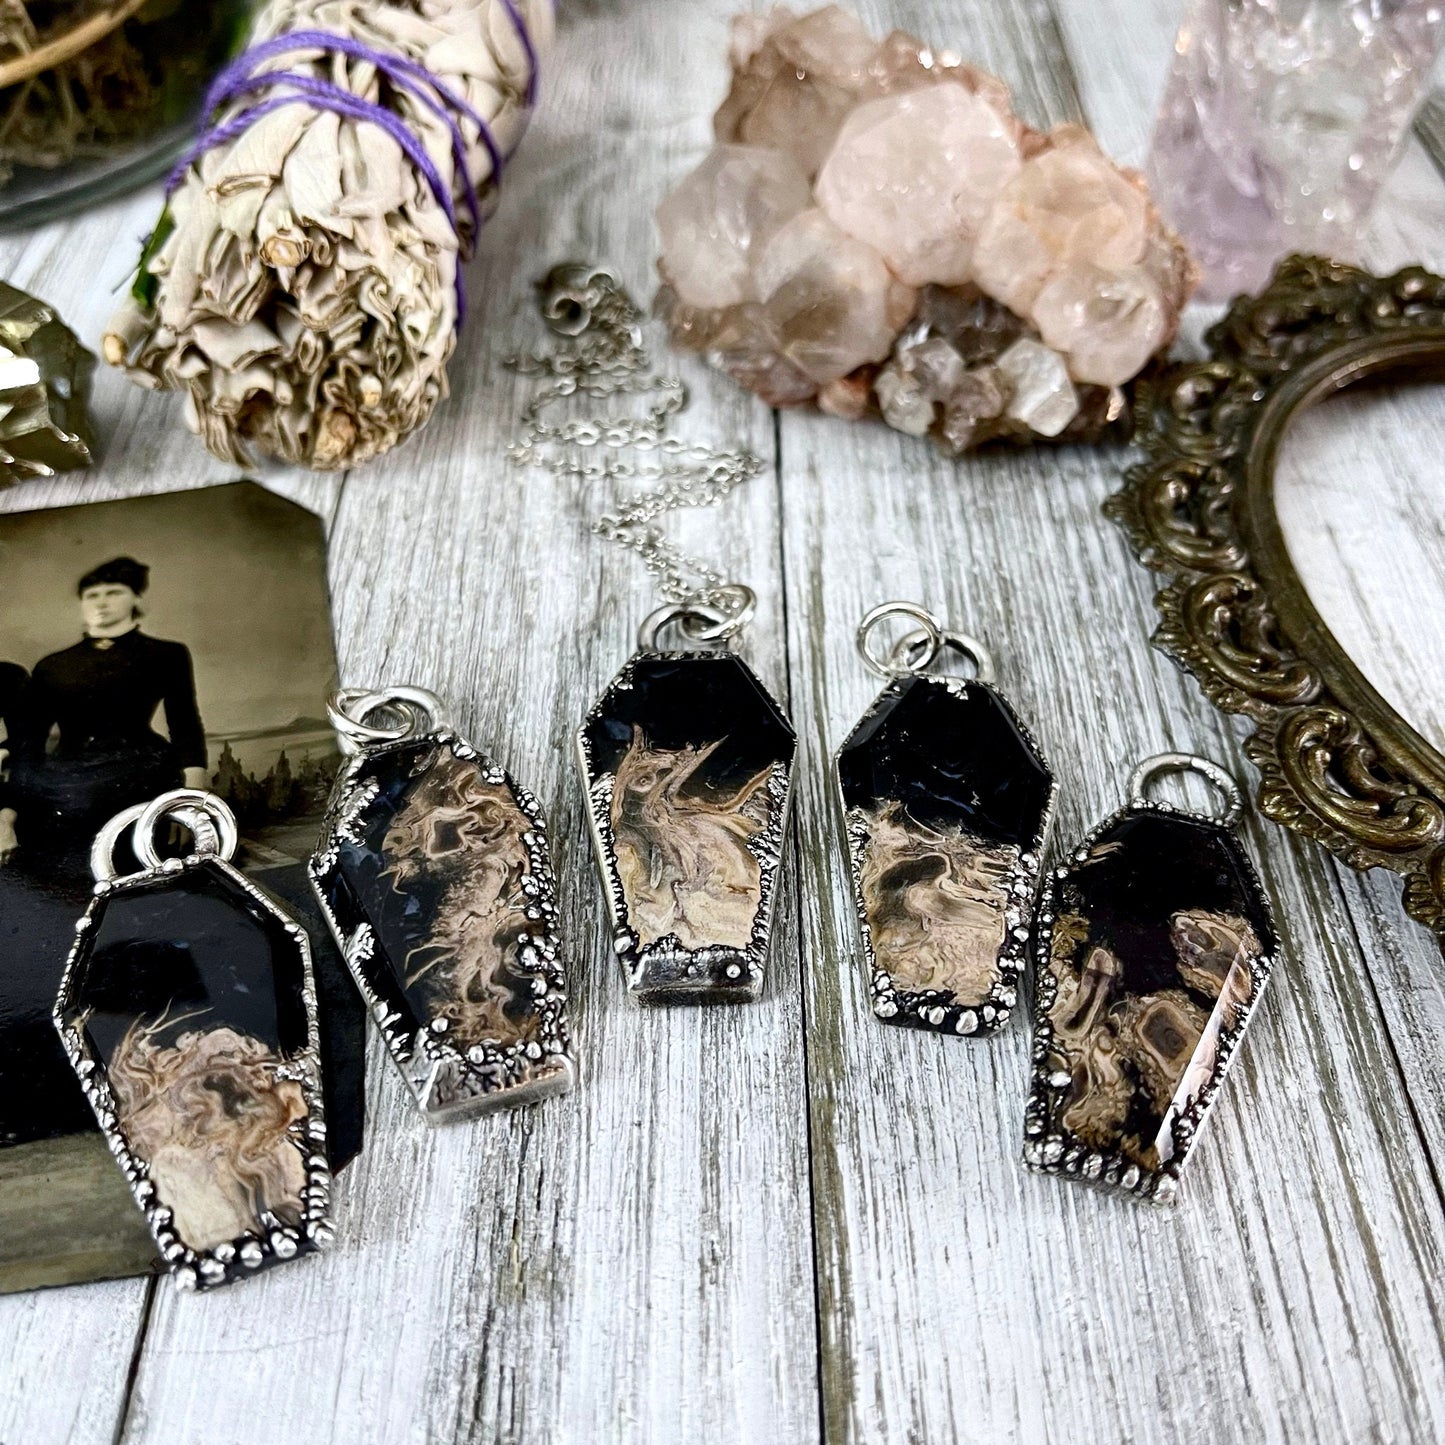 Bohemian Fashion, Bohemian Jewelry, Crystal Jewelry, Crystal Necklace, Crystal Necklaces, Crystal pendant, Etsy ID: 1164611139, Fossilized Palm Root, FOXLARK- NECKLACES, Healing Crystal, Jewelry, Jewelry For Woman, Necklaces, Sterling Silver, Stone Neckla